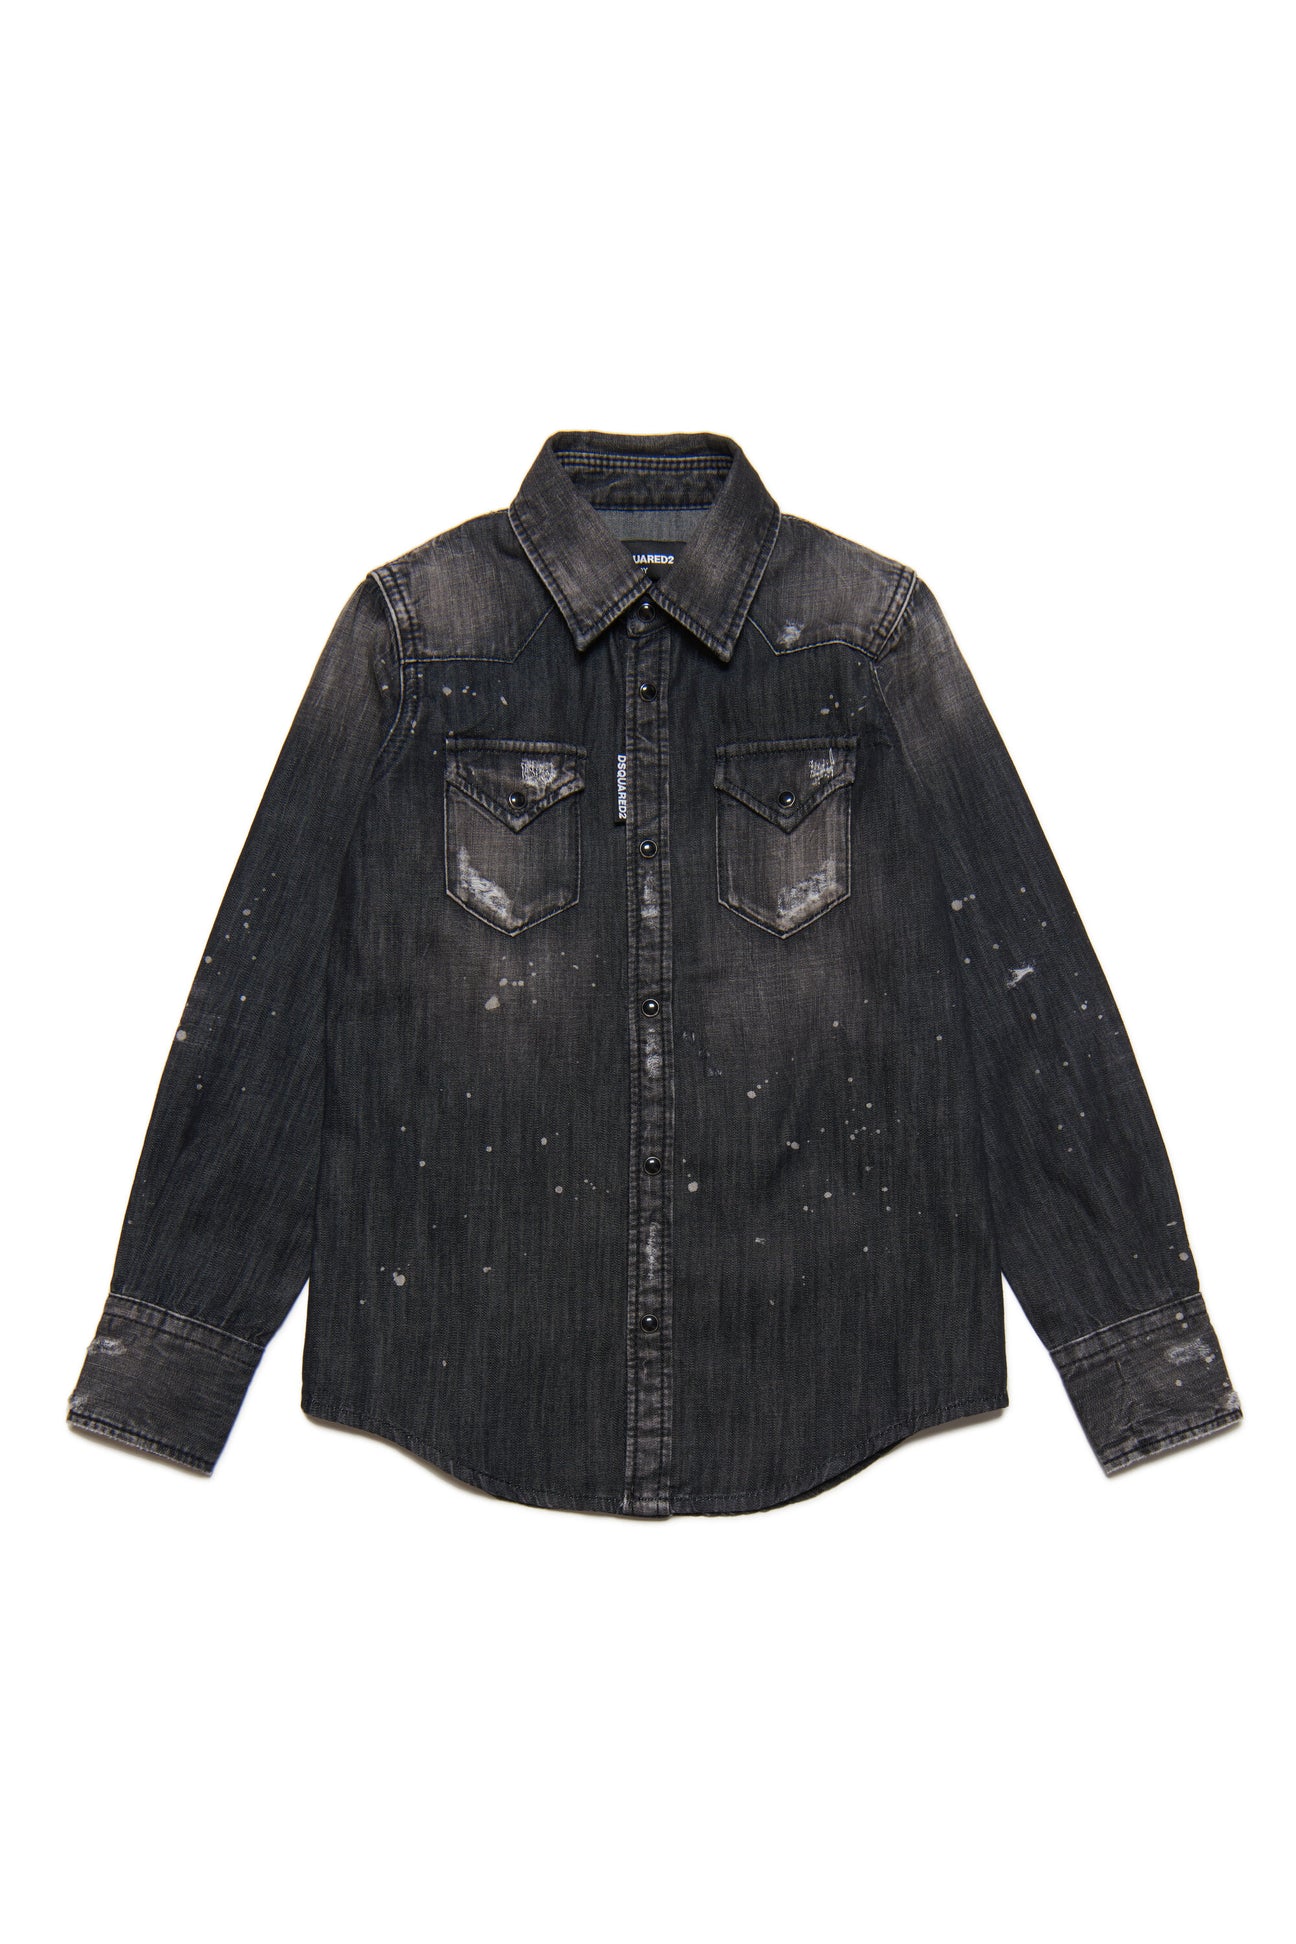 Black shaded denim shirt with tears and stains 